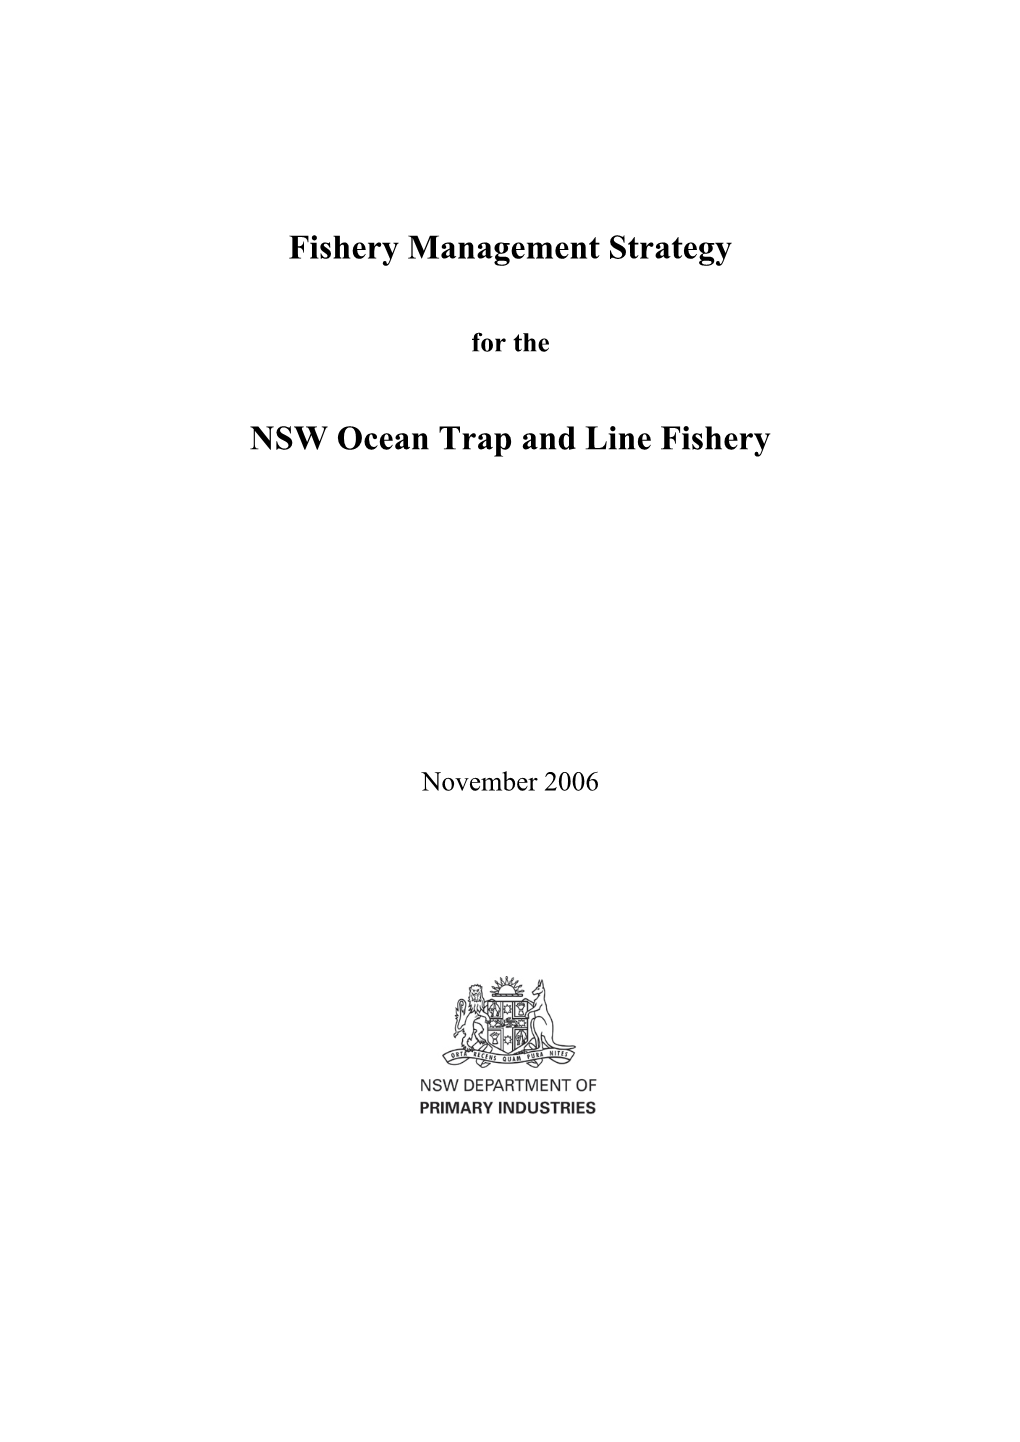 Fishery Management Strategy for the NSW Ocean Trap and Line Fishery